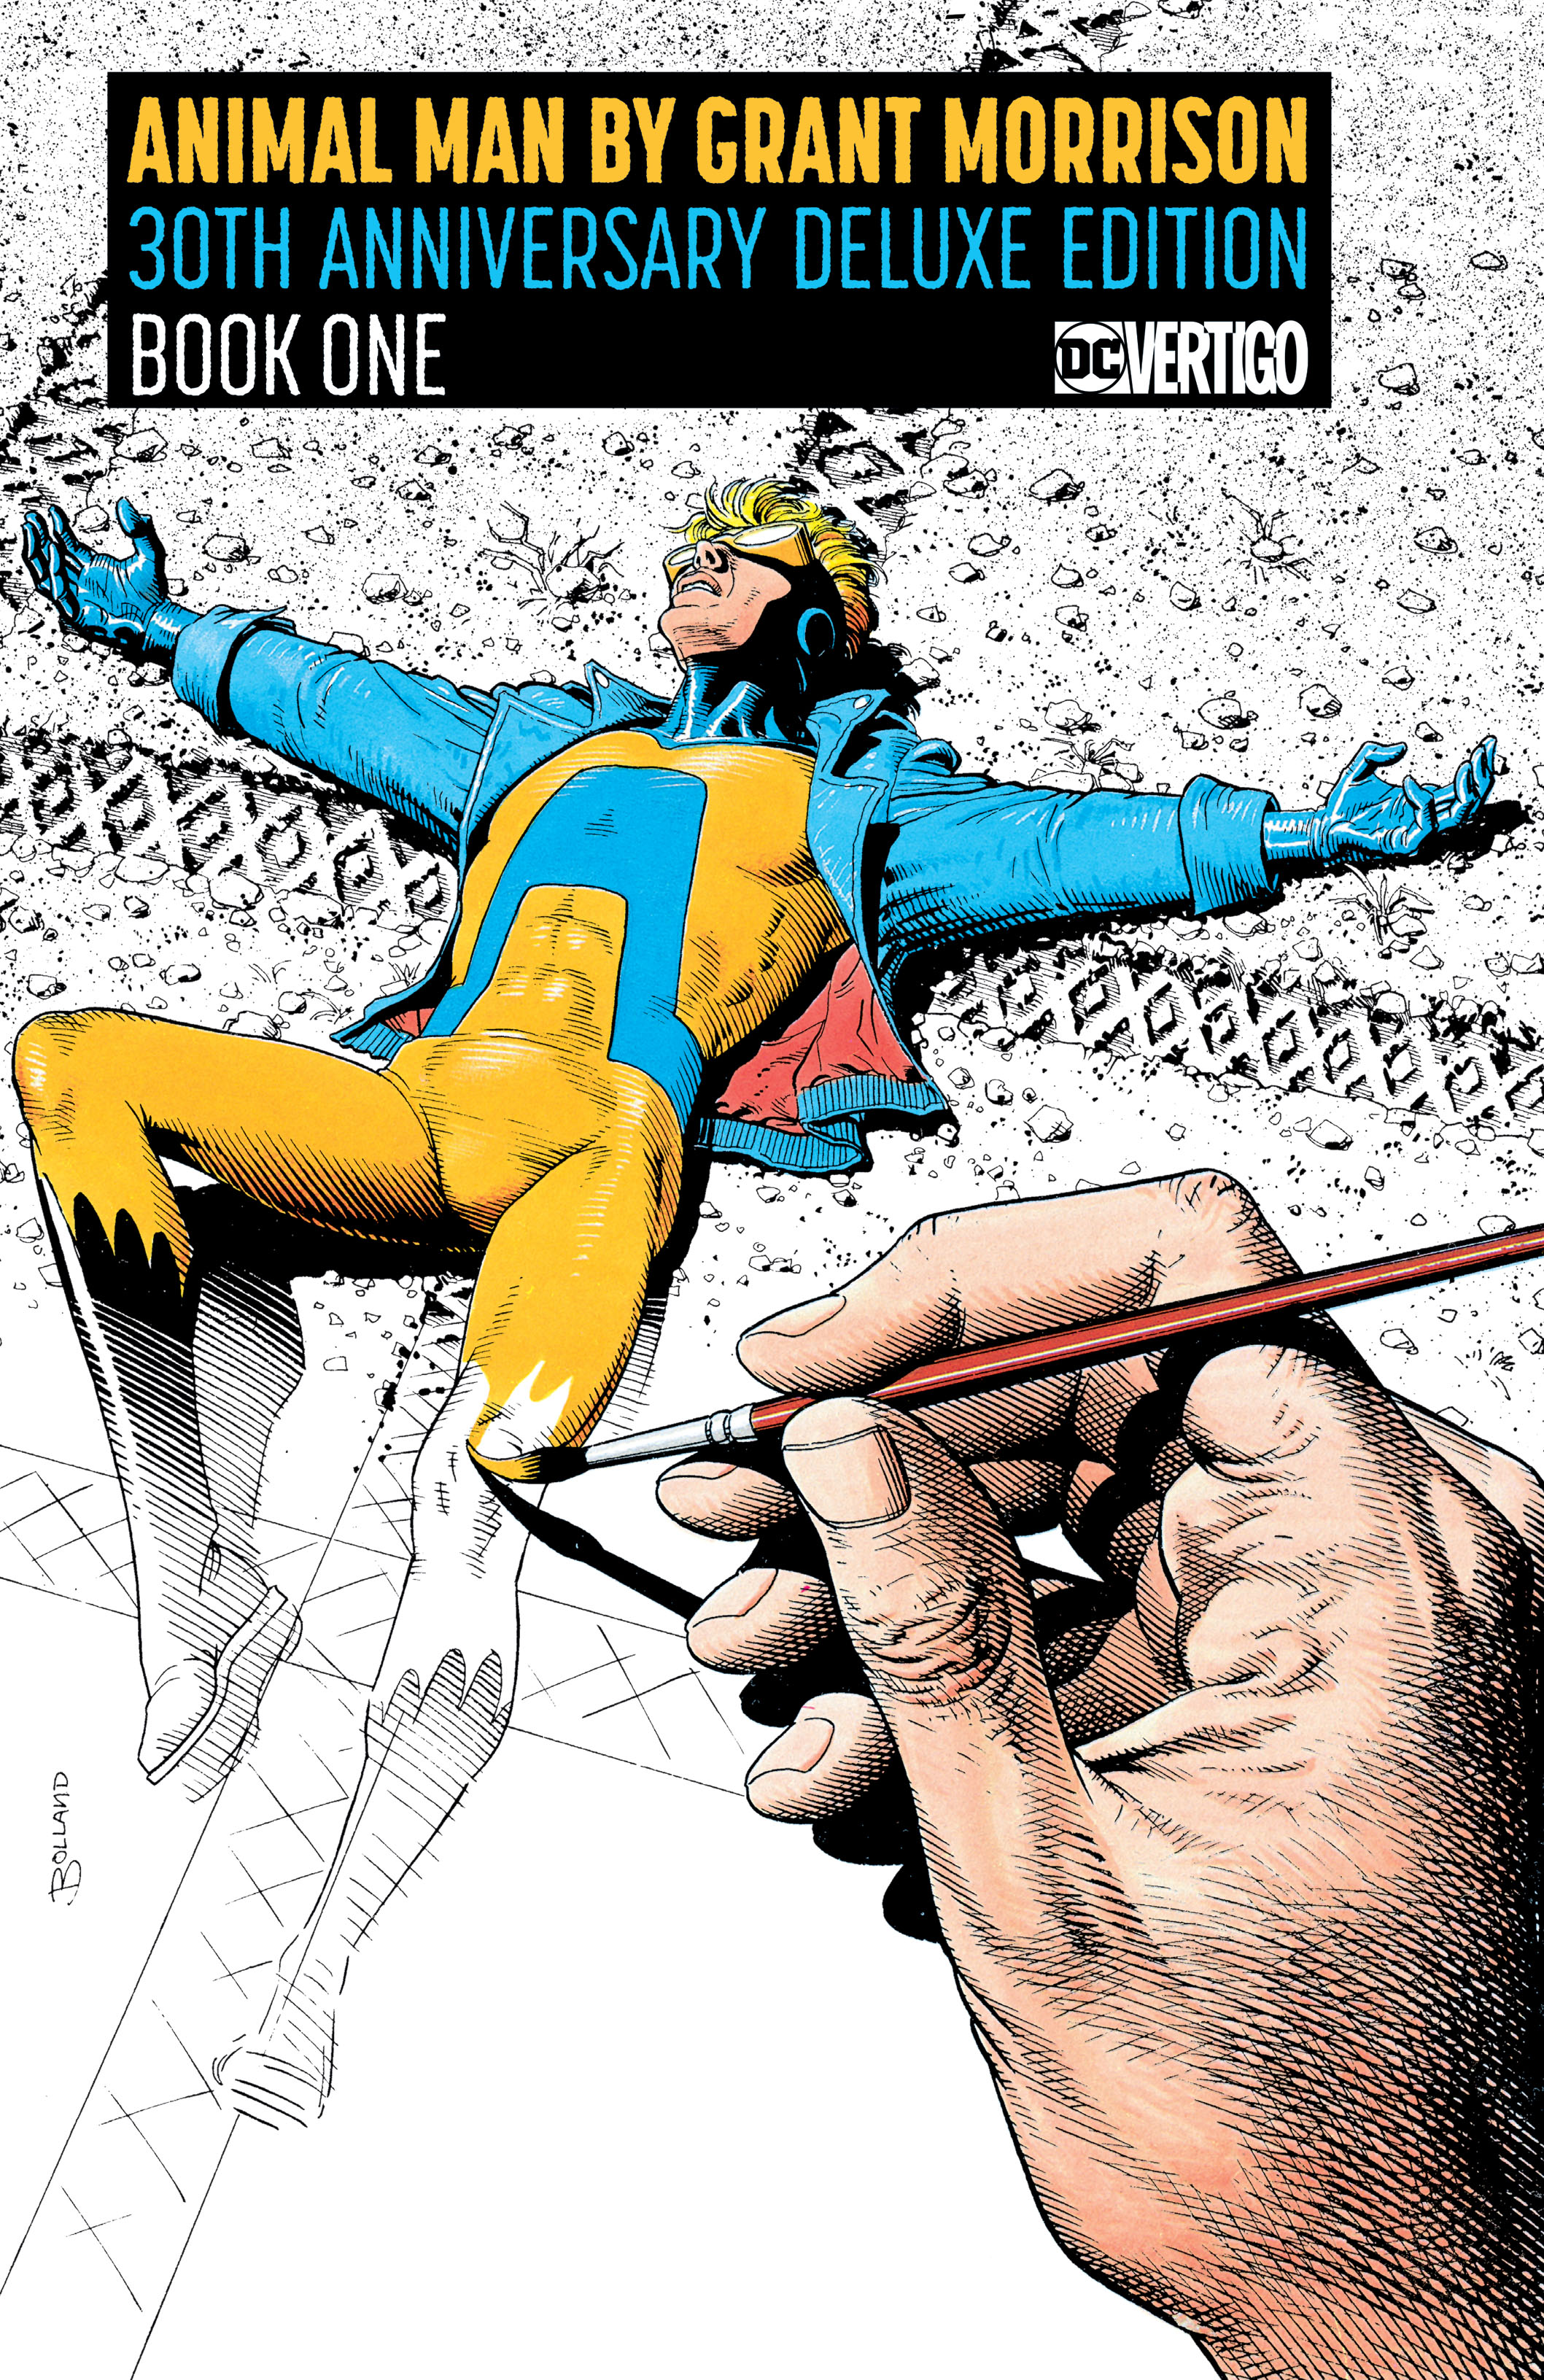 Read online Animal Man (1988) comic -  Issue # _ by Grant Morrison 30th Anniversary Deluxe Edition Book 1 (Part 1) - 1